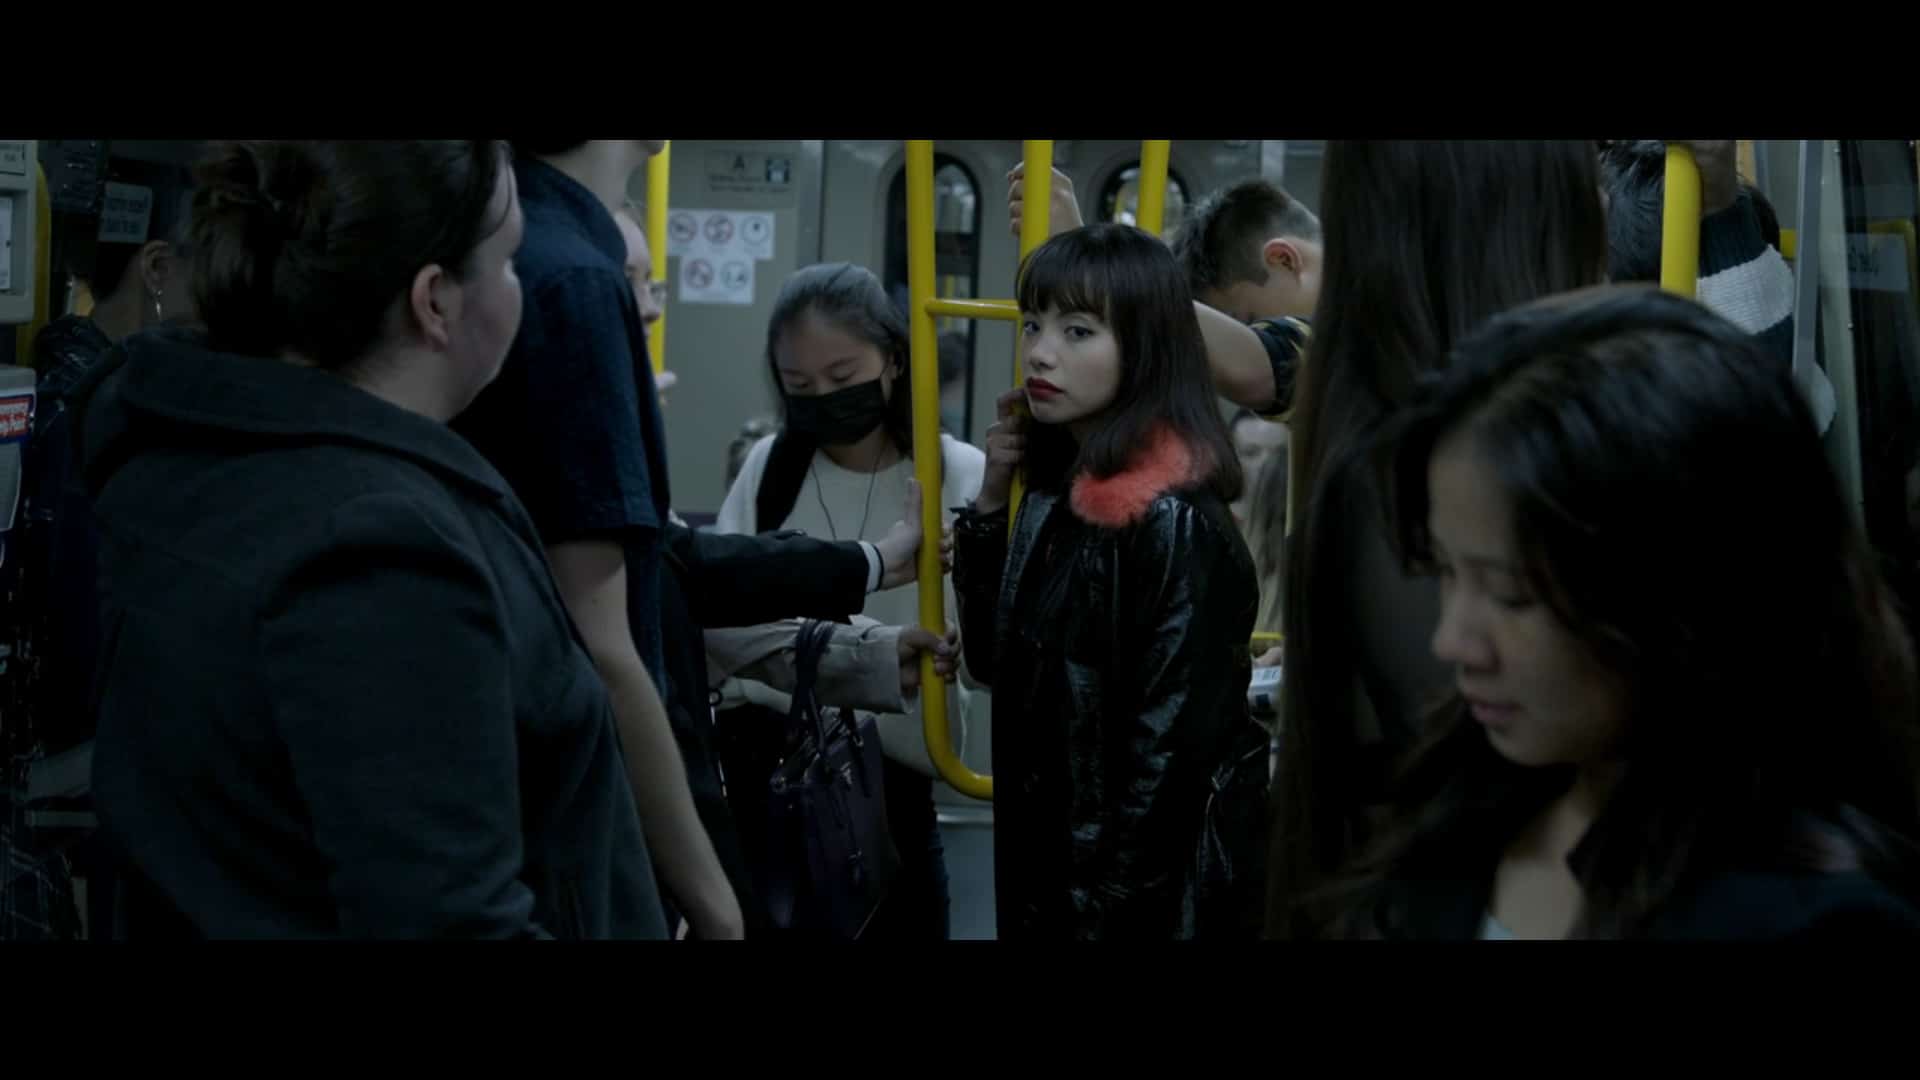 April (Jillian Nguyen) on the train, where Jack first saw her